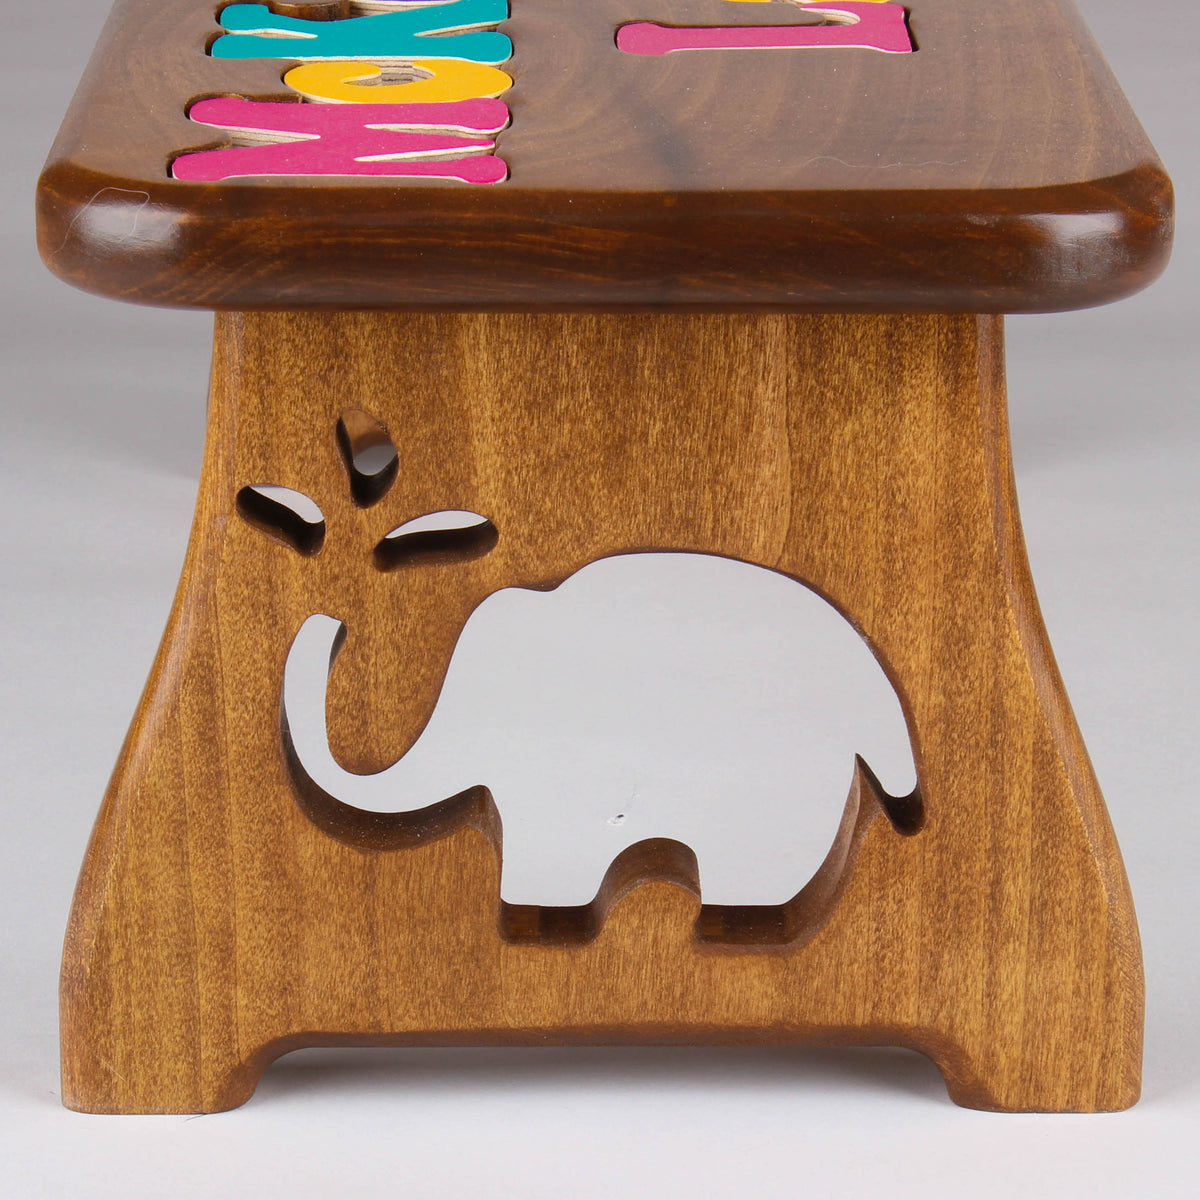 Two-Name Puzzle Stool - Stained Finish (4 Options)